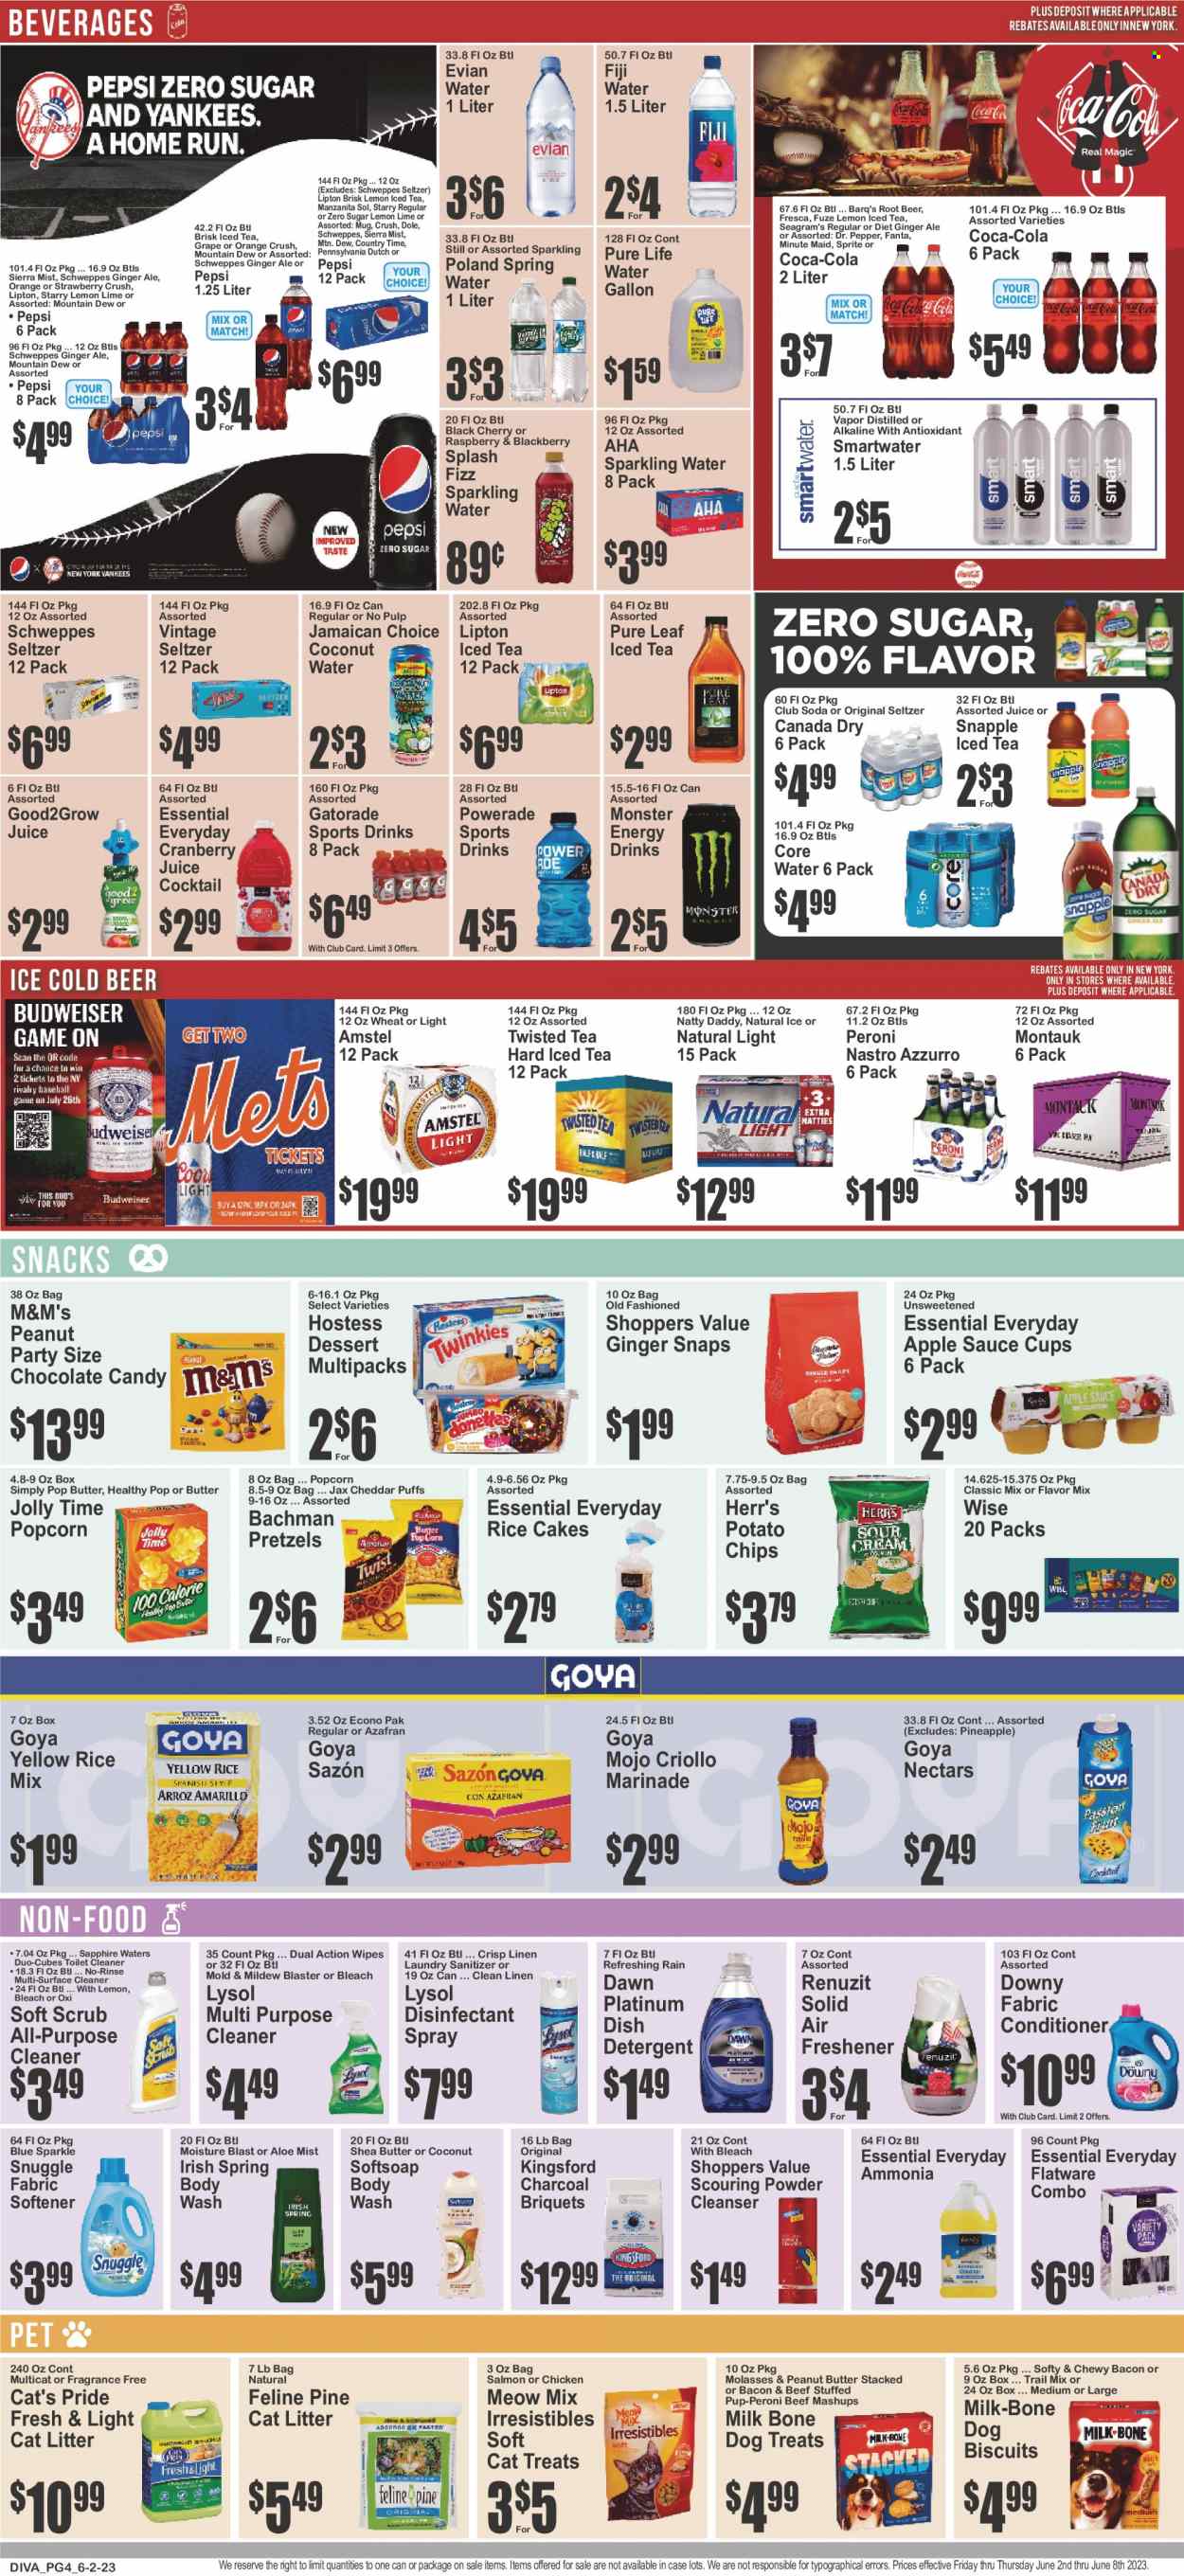 thumbnail - Key Food Flyer - 06/02/2023 - 06/08/2023 - Sales products - pretzels, puffs, dessert, Dole, cherries, oranges, salmon, sauce, Kingsford, snack, cheese, M&M's, chocolate candies, Candy, potato chips, chips, popcorn, Goya, marinade, apple sauce, molasses, peanut butter, trail mix, Canada Dry, Coca-Cola, cranberry juice, ginger ale, Mountain Dew, Schweppes, Sprite, Powerade, Pepsi, juice, Fanta, energy drink, Monster, Lipton, ice tea, Dr. Pepper, coconut water, soft drink, Monster Energy, Snapple, Sierra Mist, Country Time, Gatorade, fruit punch, Club Soda, seltzer water, spring water, sparkling water, Pure Life Water, Smartwater, Evian, water, Pure Leaf, beer, Sol, Amstel, wipes, detergent, surface cleaner, cleaner, desinfection, toilet cleaner, Lysol, Snuggle, fabric softener, laundry detergent, Downy Laundry, dishwasher cleaner, body wash, Softsoap, cleanser, shea butter, antibacterial spray, flatware, mug, Renuzit, air freshener, cat litter, animal treats, dog food, dog biscuits, Pup-Peroni, Meow Mix, electrolyte drink, Twisted Tea. Page 5.